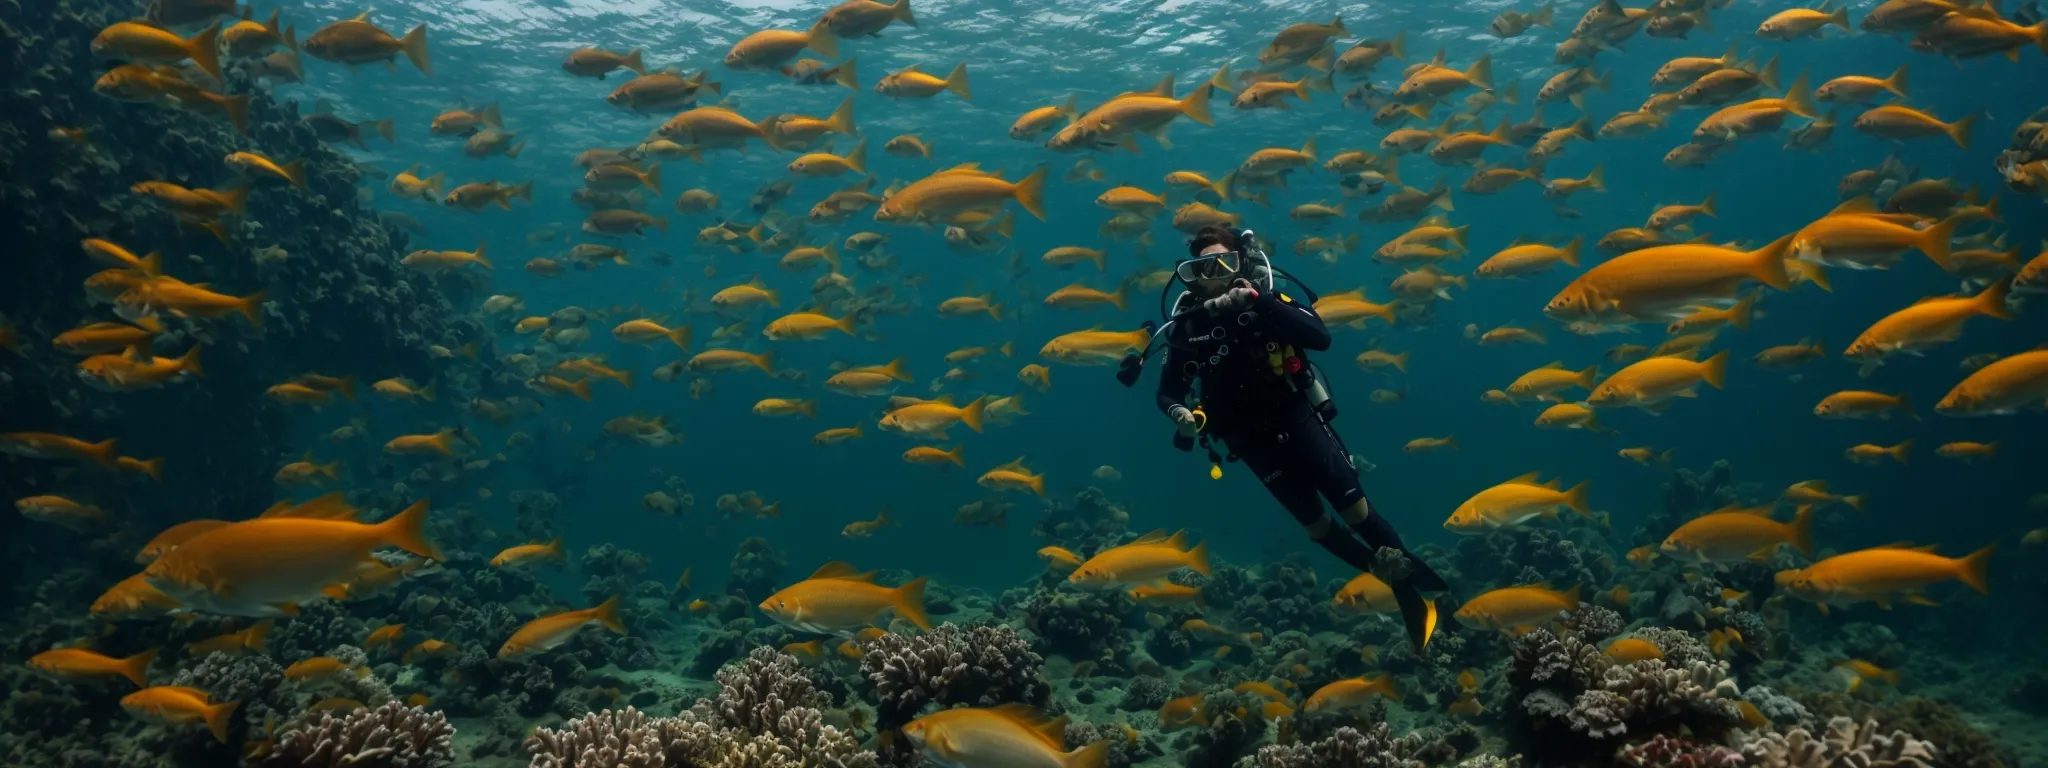 a diver with an underwater tablet among schools of fish represents diving into the depths of keyword analytics for strategic insights.